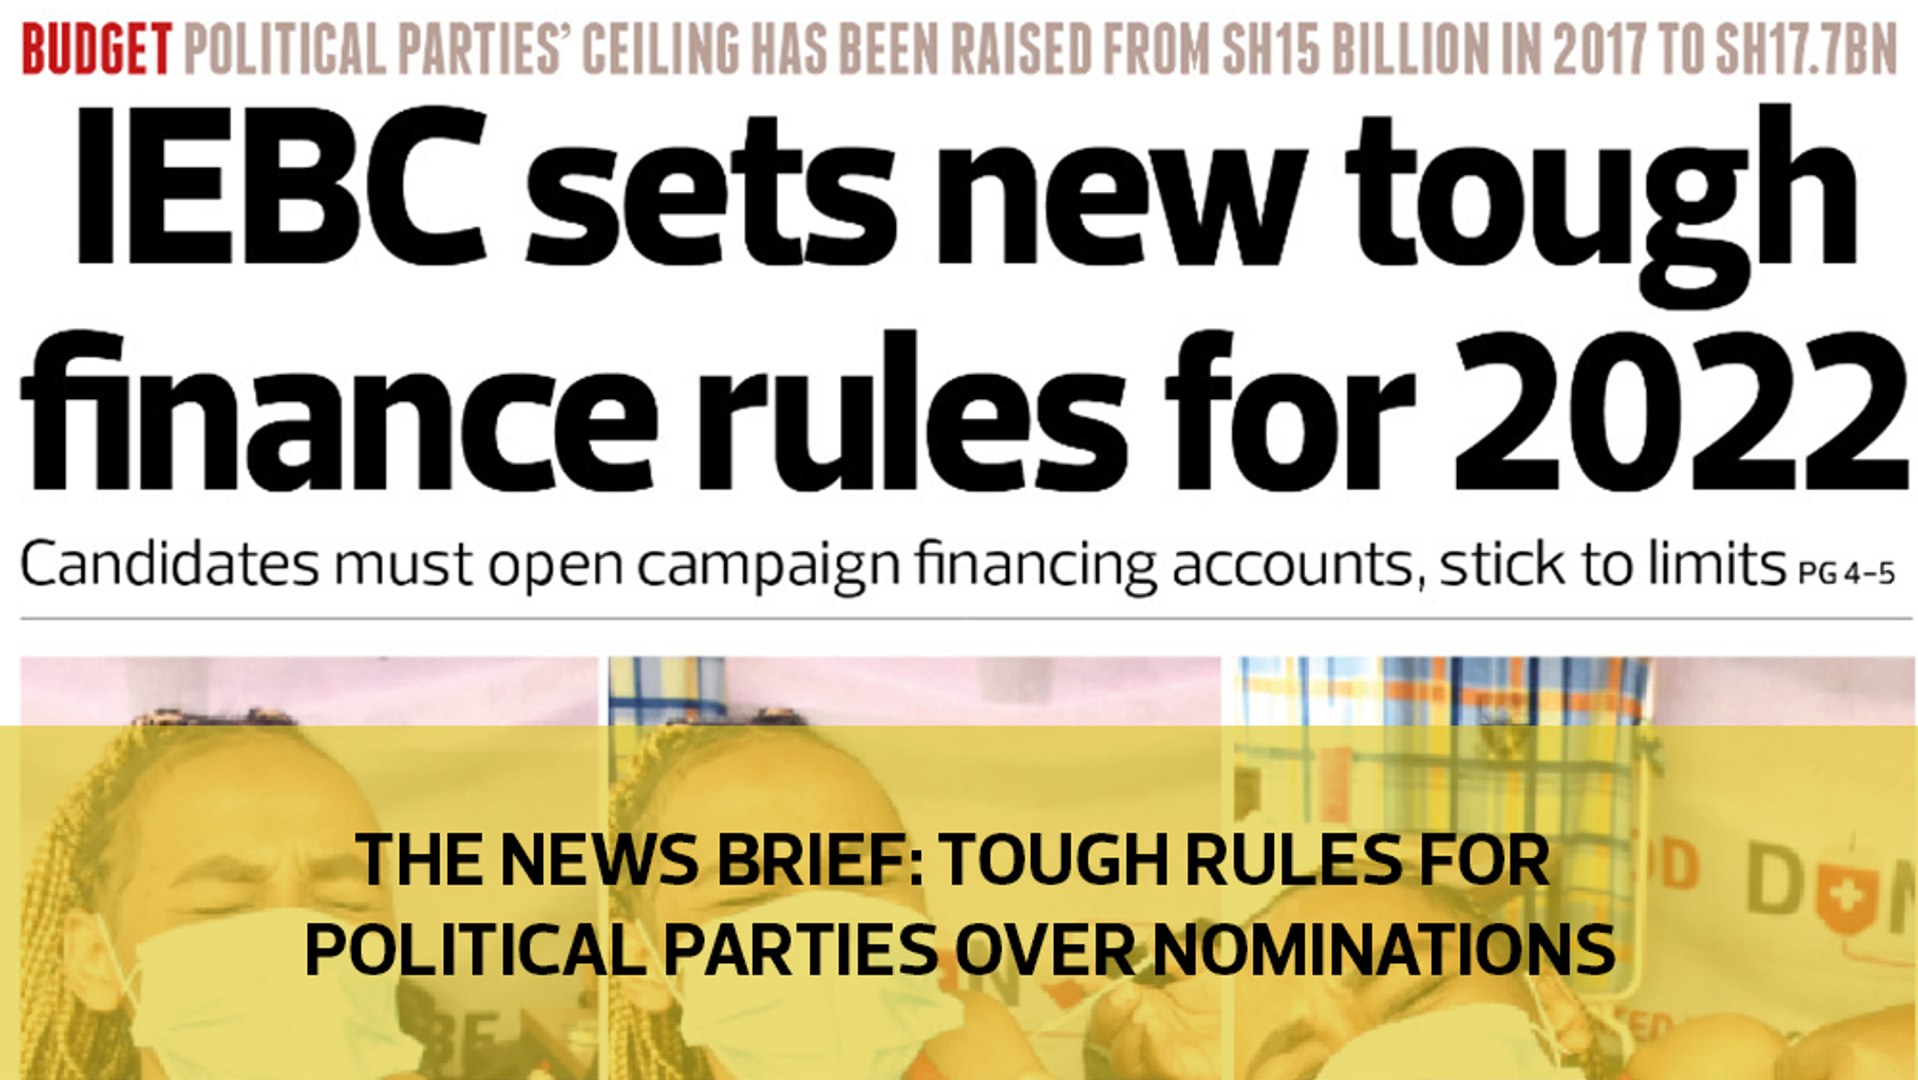 The News Brief: Tough rules for political parties over nominations